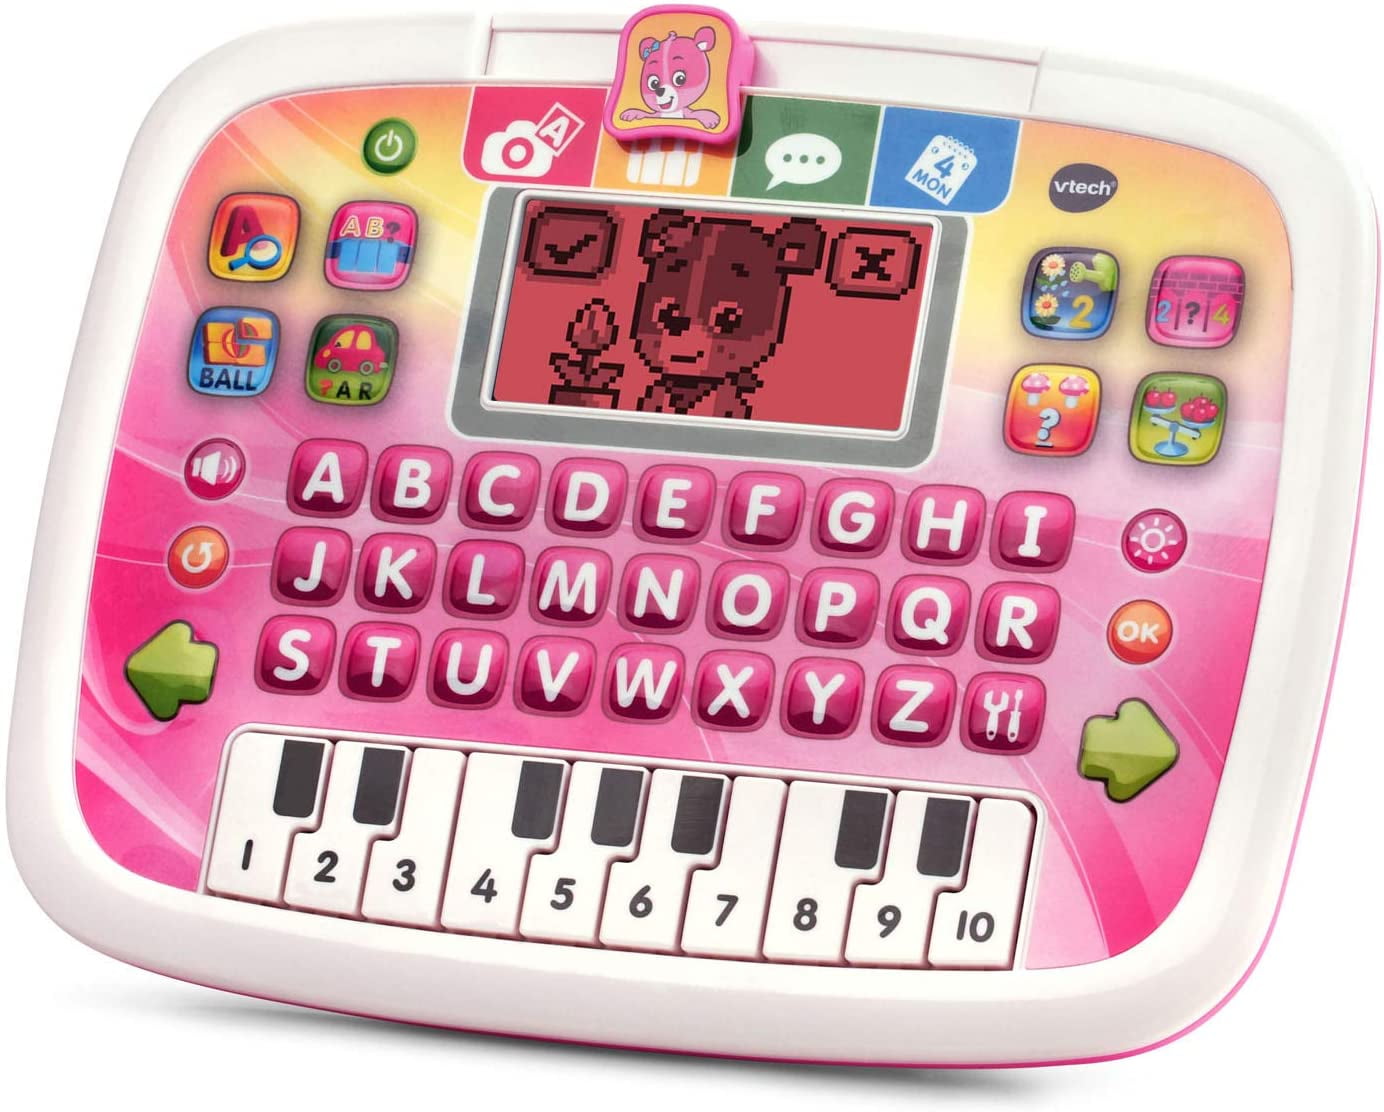 VTech Little Apps Tablet, Pink, tablet features a color changing screen, letter buttons and piano keyboard; electronic toy.., By Visit the VTech Store -